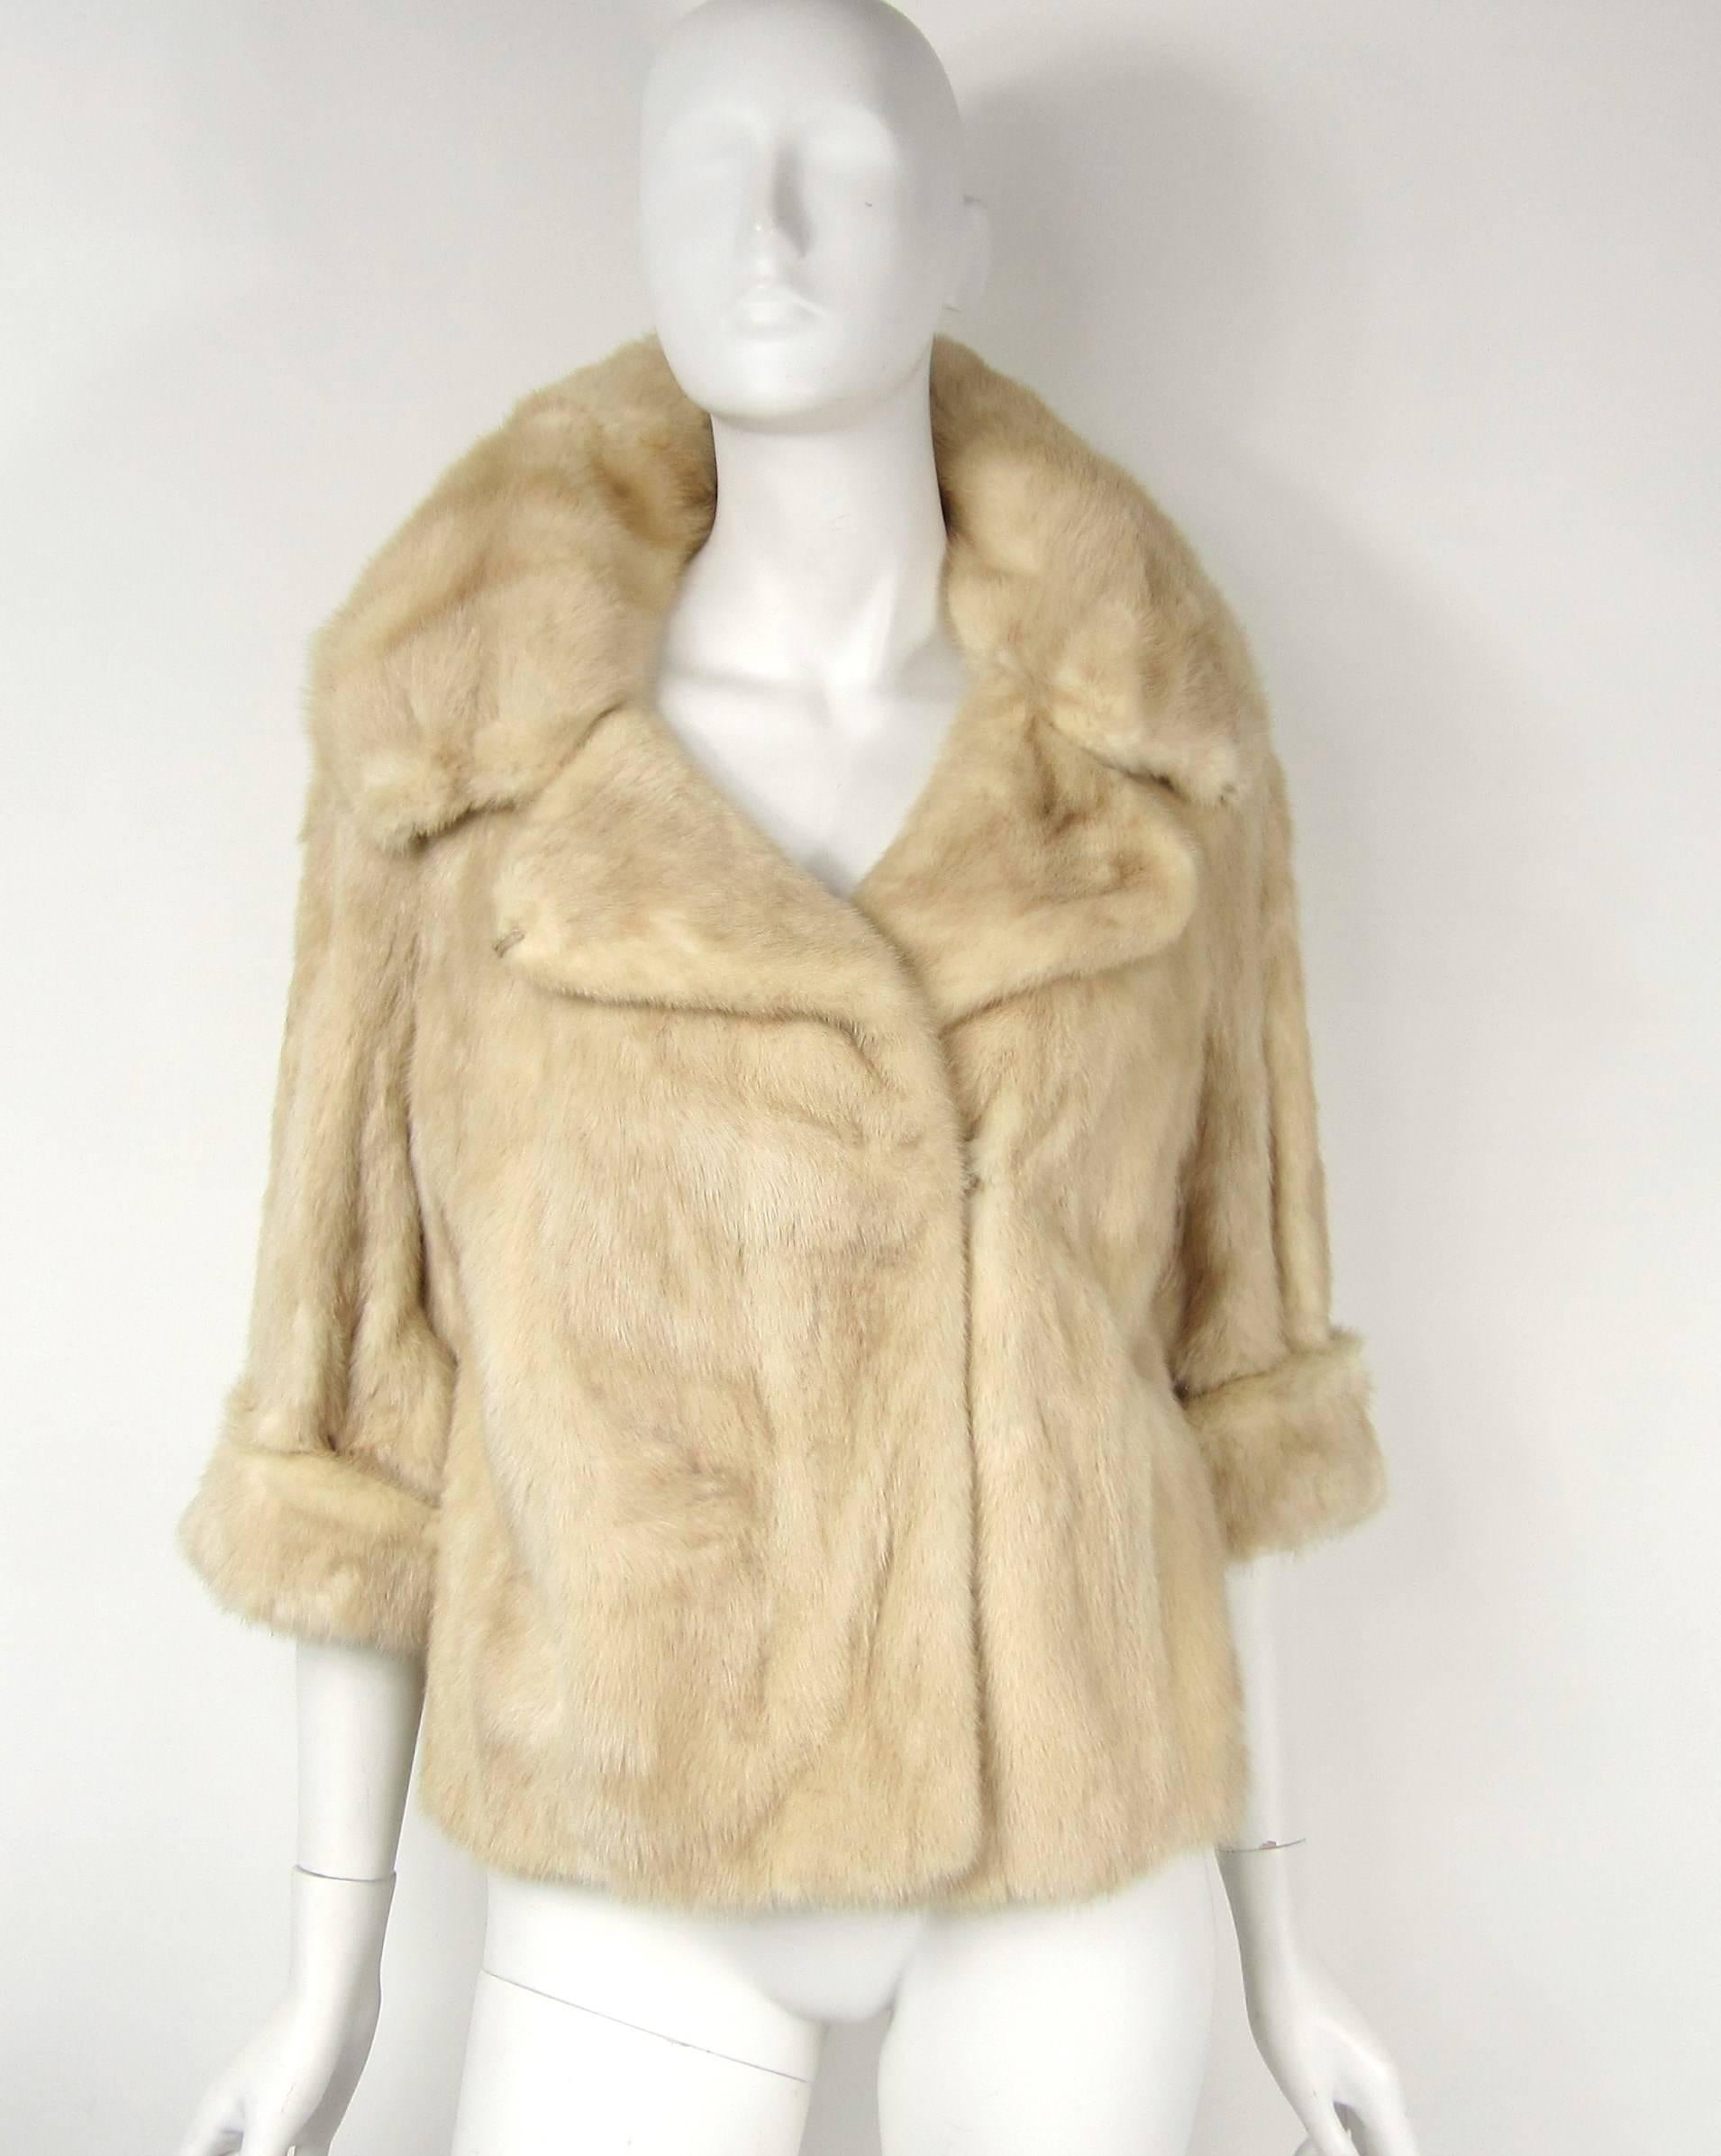 Stunning Cream mink Jacket with a Great wide collar. Bracelet sleeves with cuffs. Slit pockets. Hook and eye closure Measuring Bust up to 39 in, Waist up to 42 in, Collar 6 in, Cuff 3 in, Length 23 in, Will fit a Small - Medium. We have many more